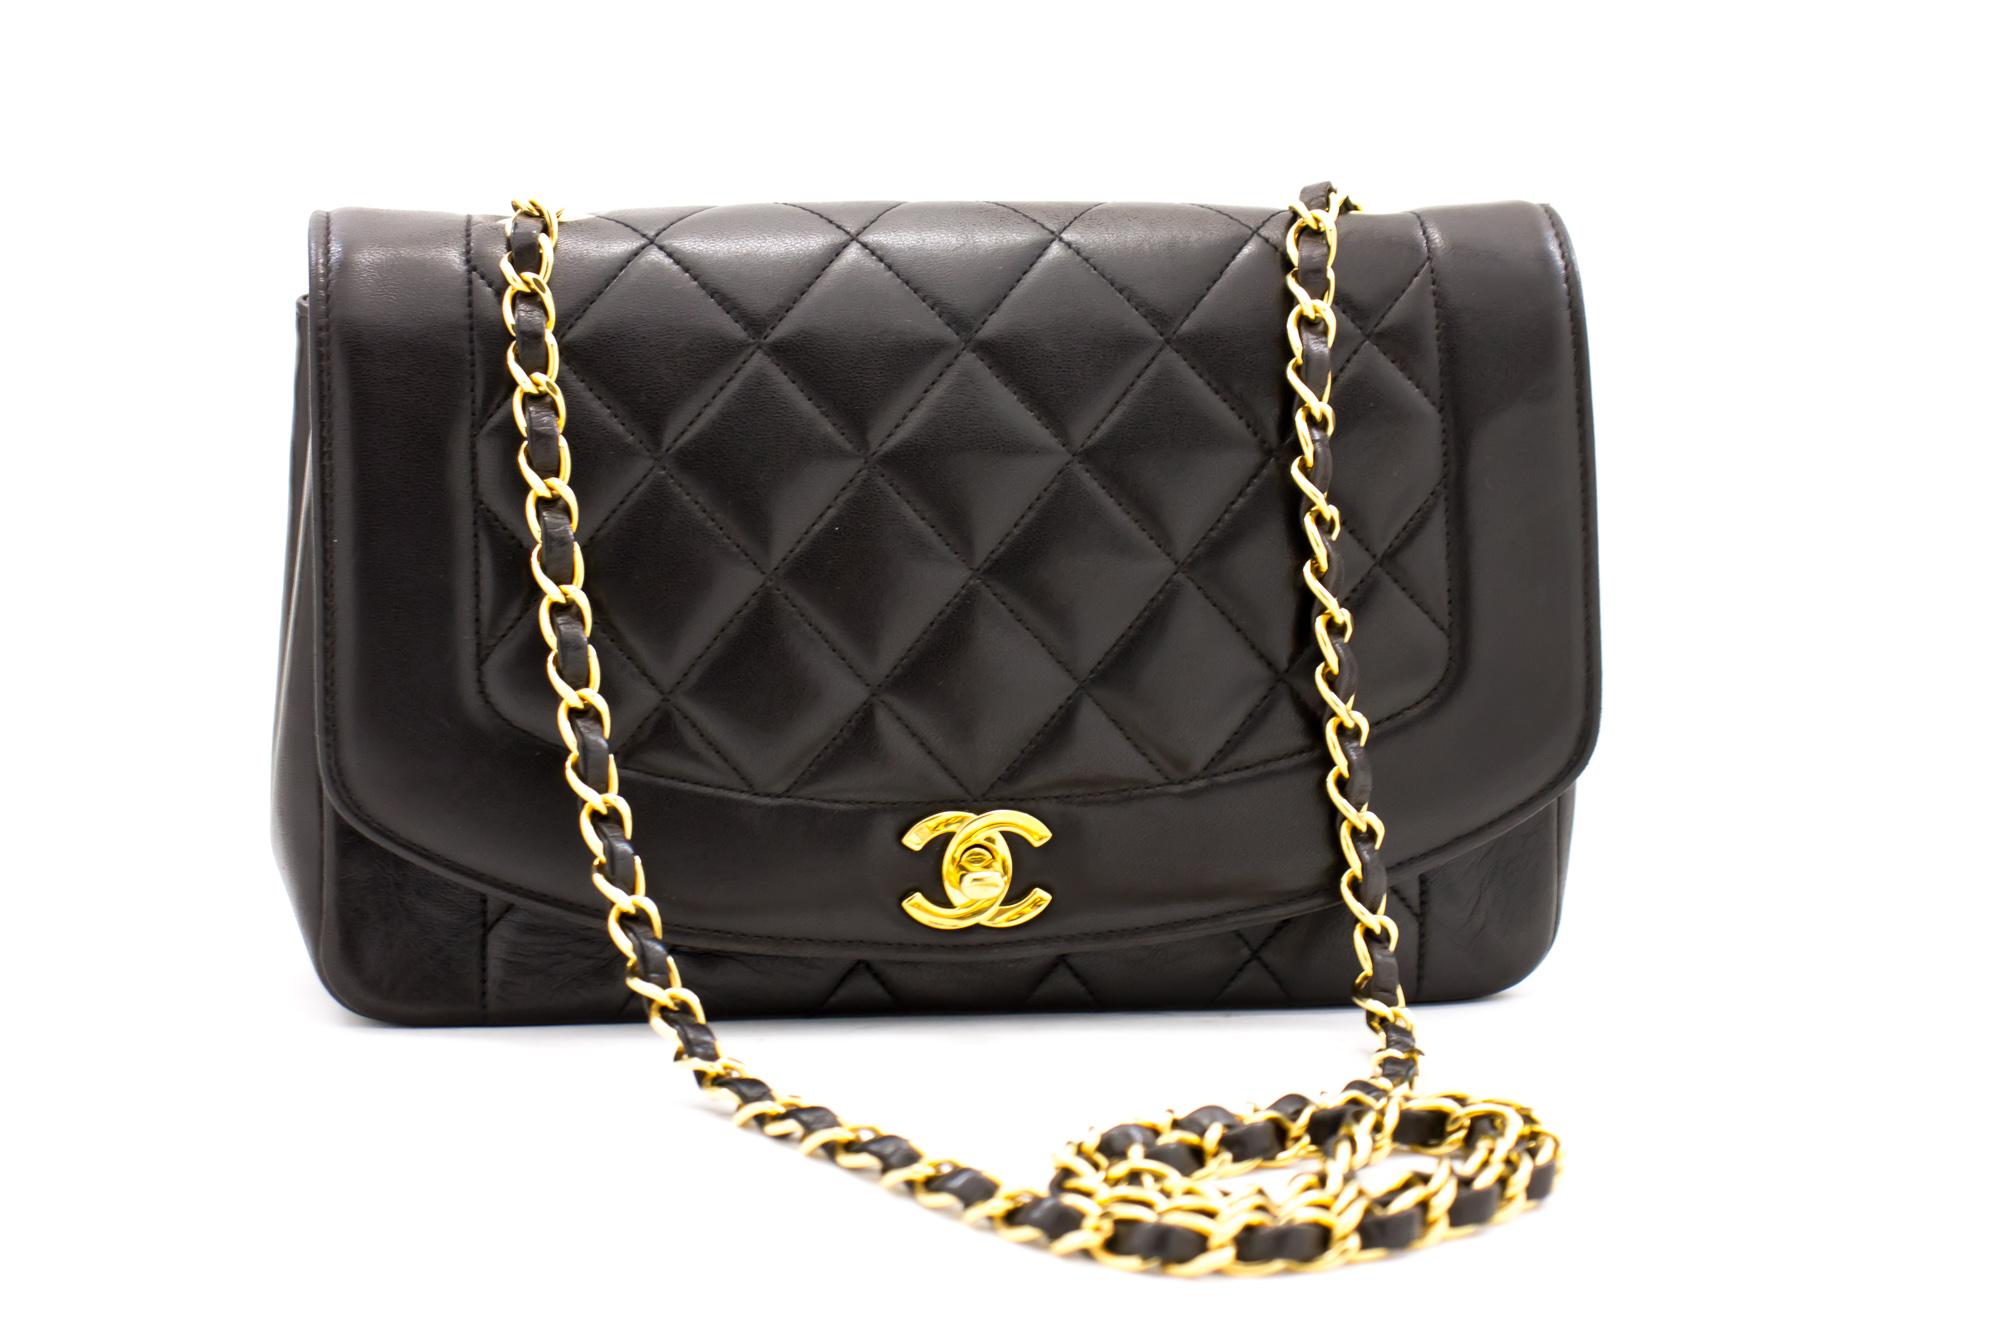 An authentic CHANEL Diana Flap Chain Shoulder Bag Crossbody Black Quilted Lamb. The color is Black. The outside material is Leather. The pattern is Solid. This item is Vintage / Classic. The year of manufacture would be 1994-1996.
Conditions &